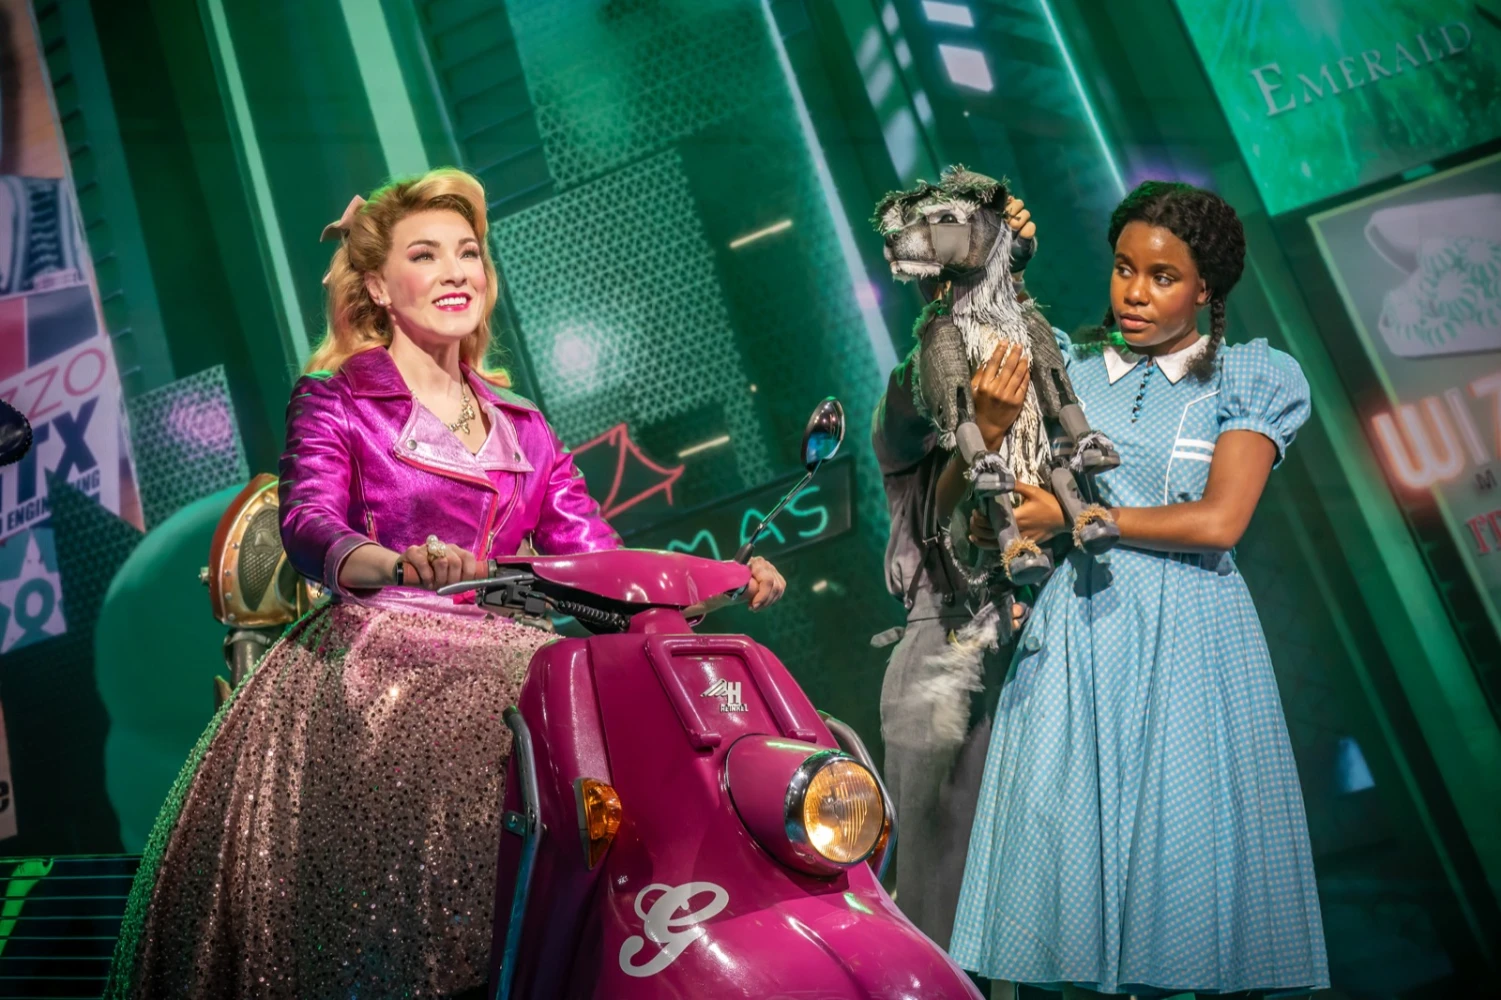 The Wizard of Oz: What to expect - 2